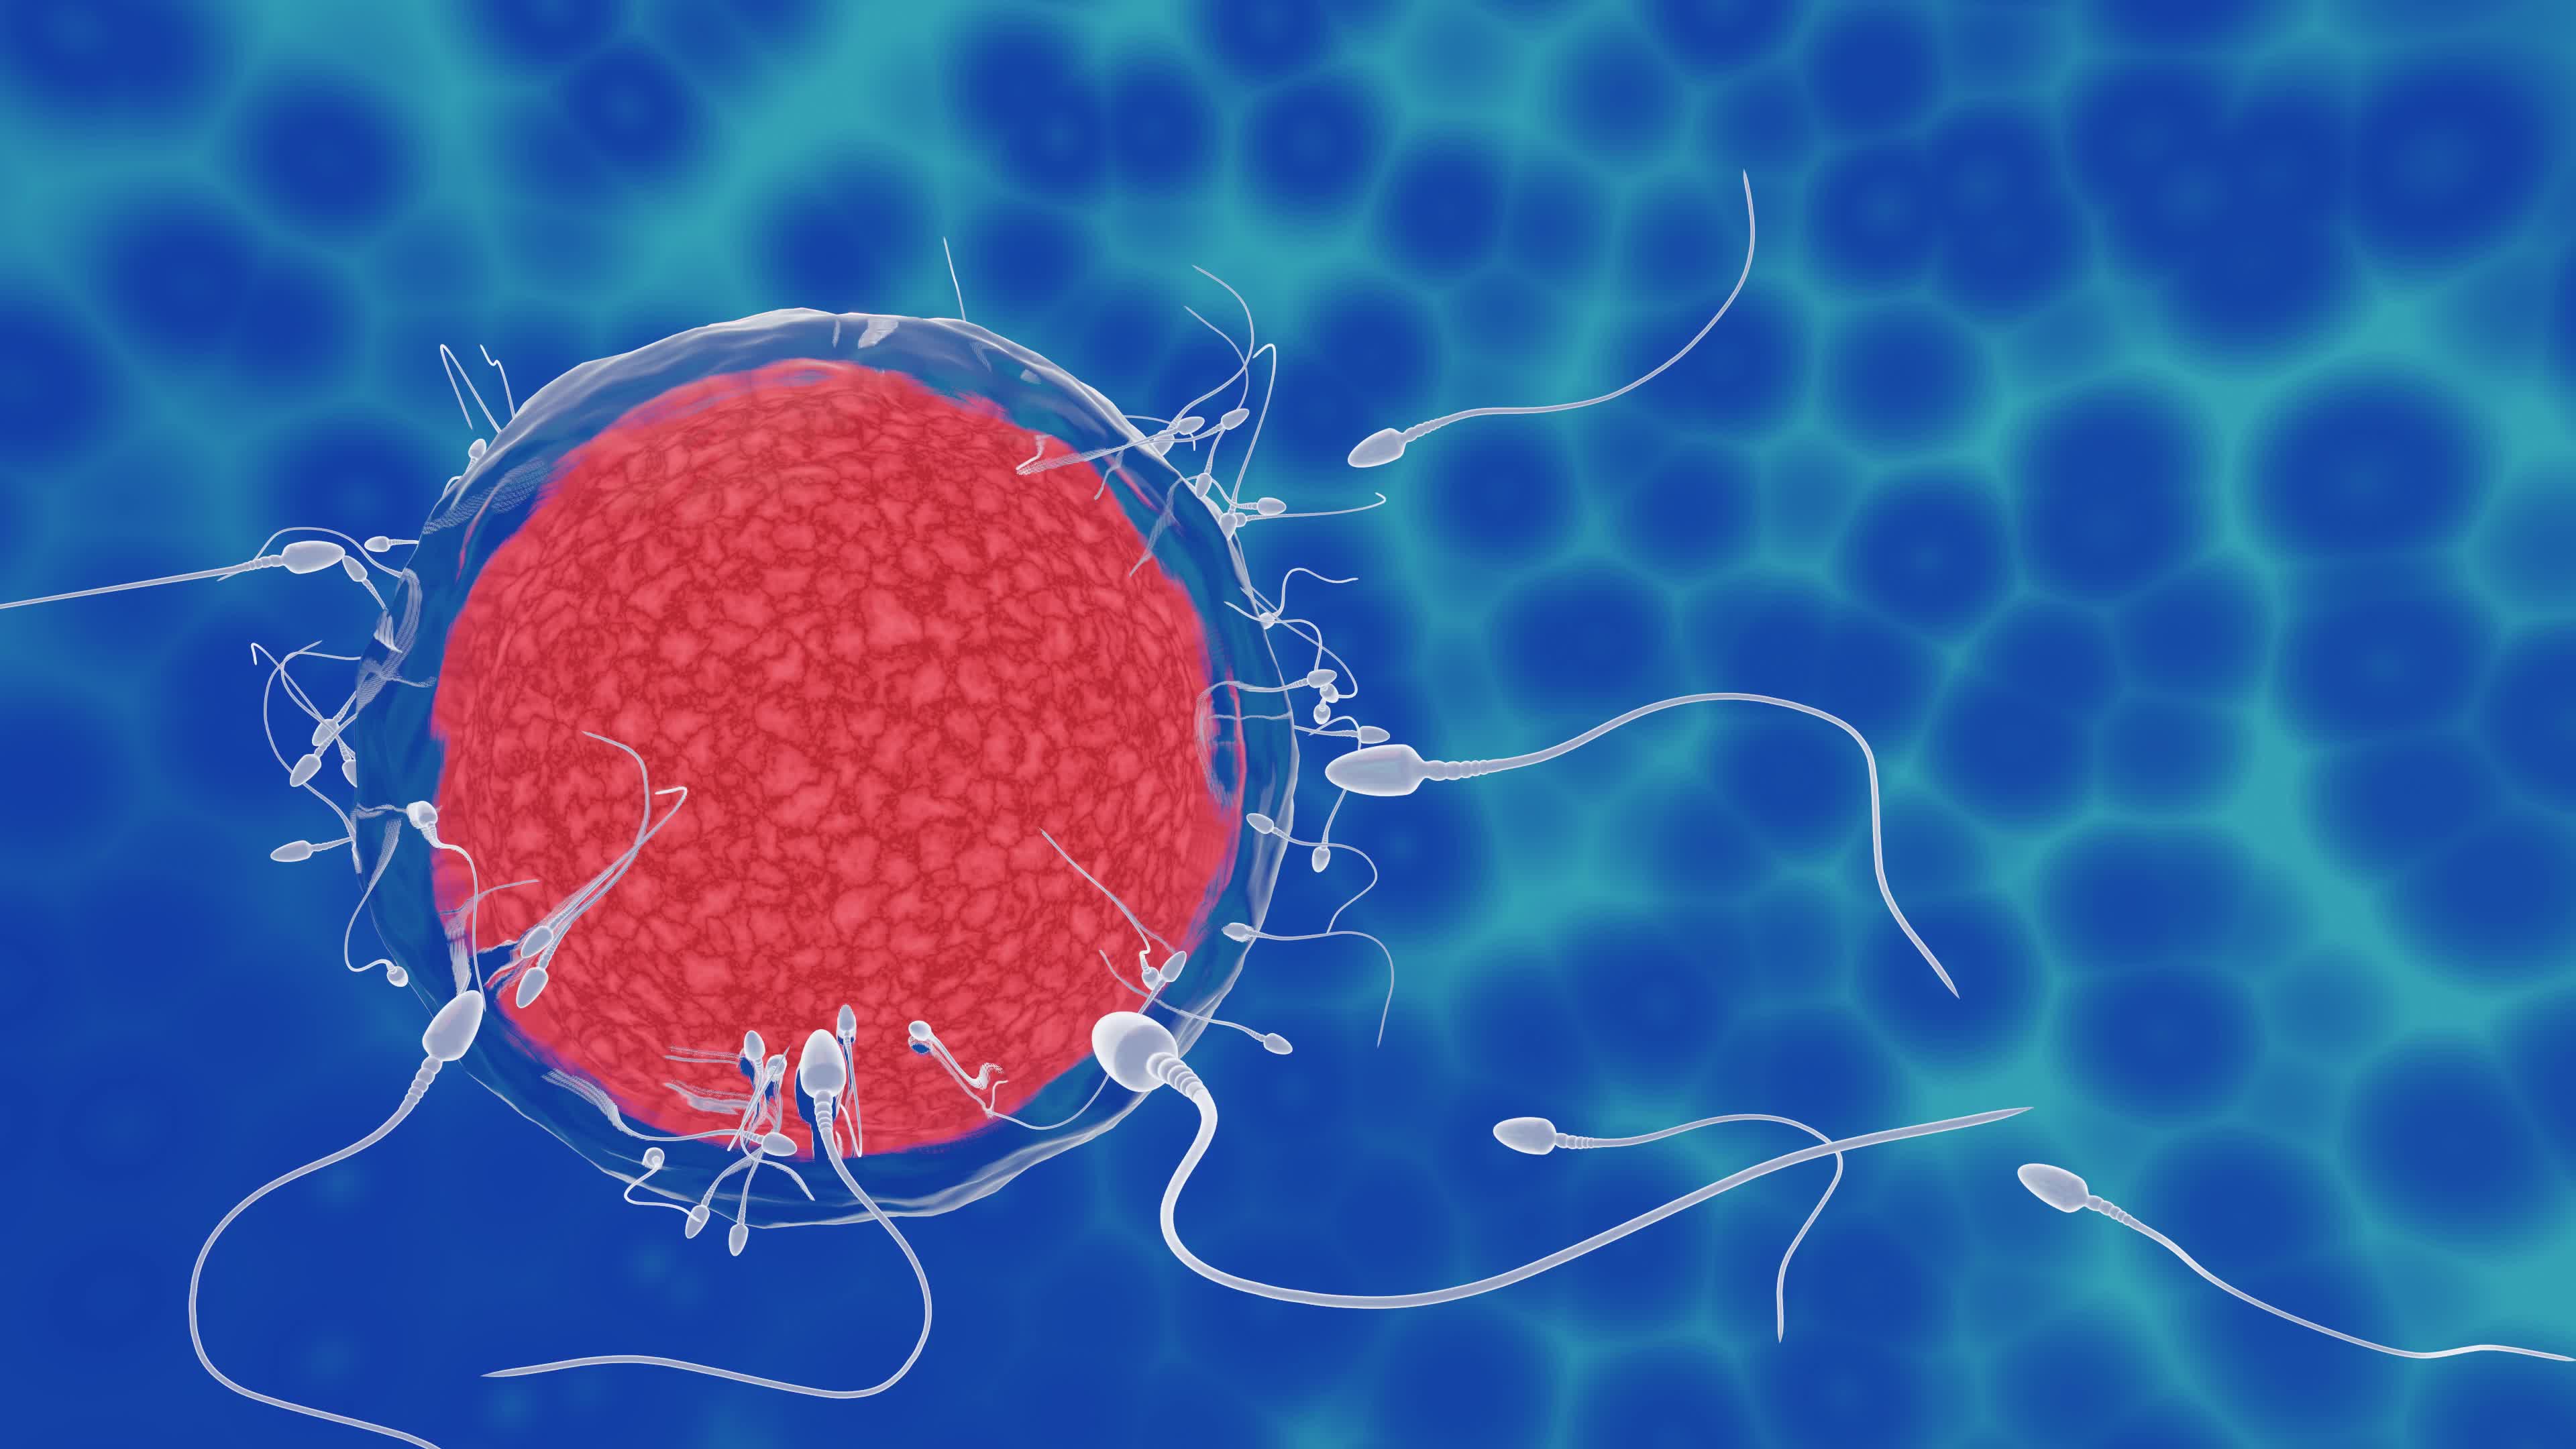 The sperm fertility from men's cum is directed towards the egg bubble after  sex. To do human mating. A pre-fertilization model between an egg and a  sperm. 3D Rendering 7049198 Stock Video